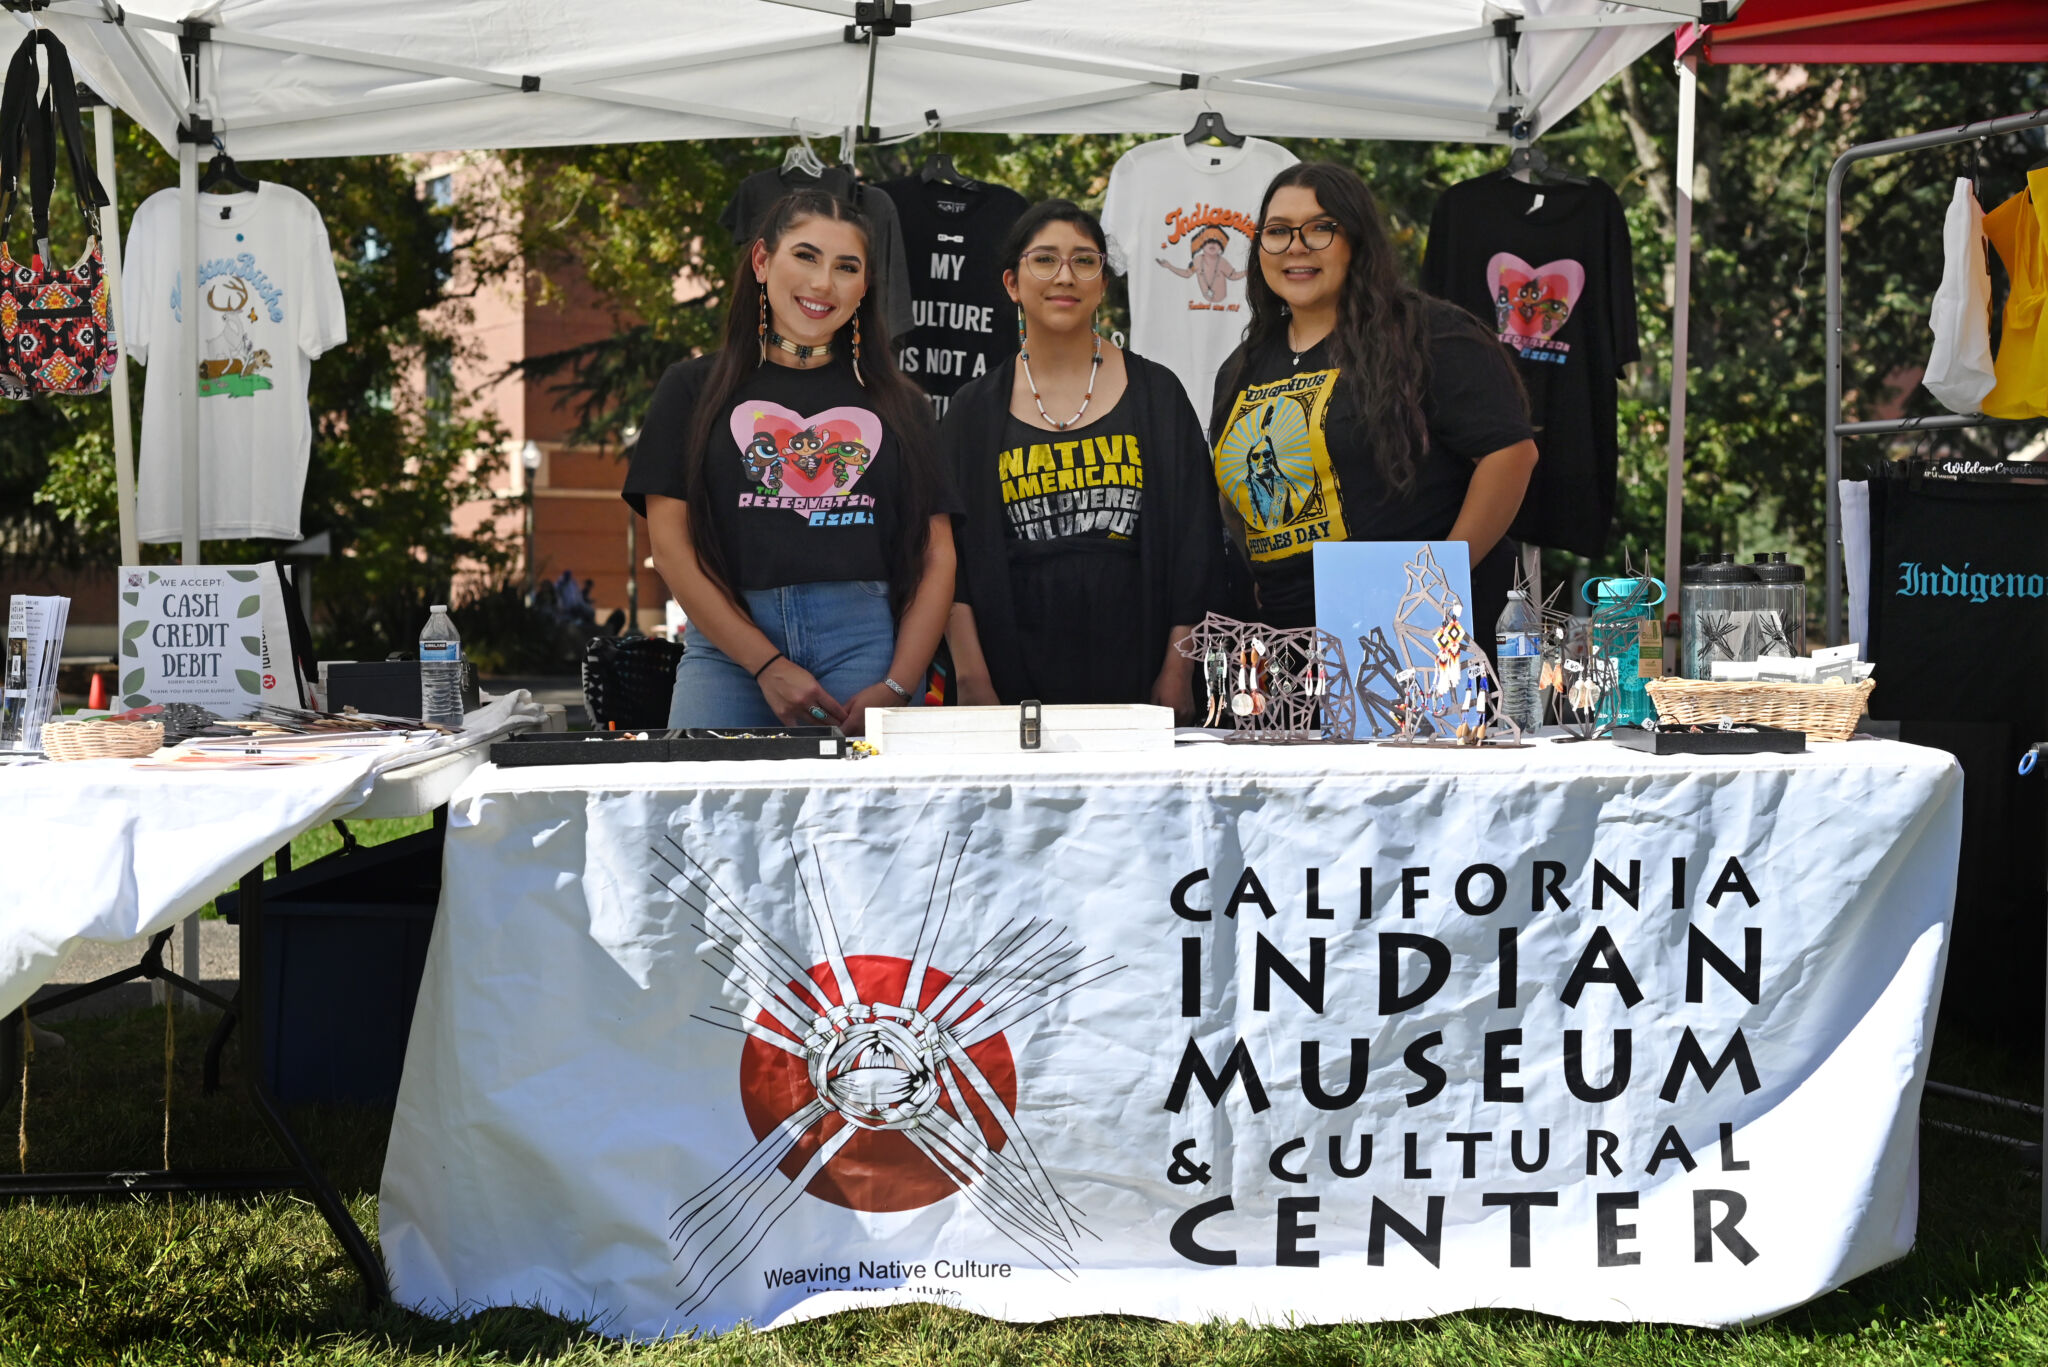 Healing through cultural arts at the California Indian Museum and Cultural Center